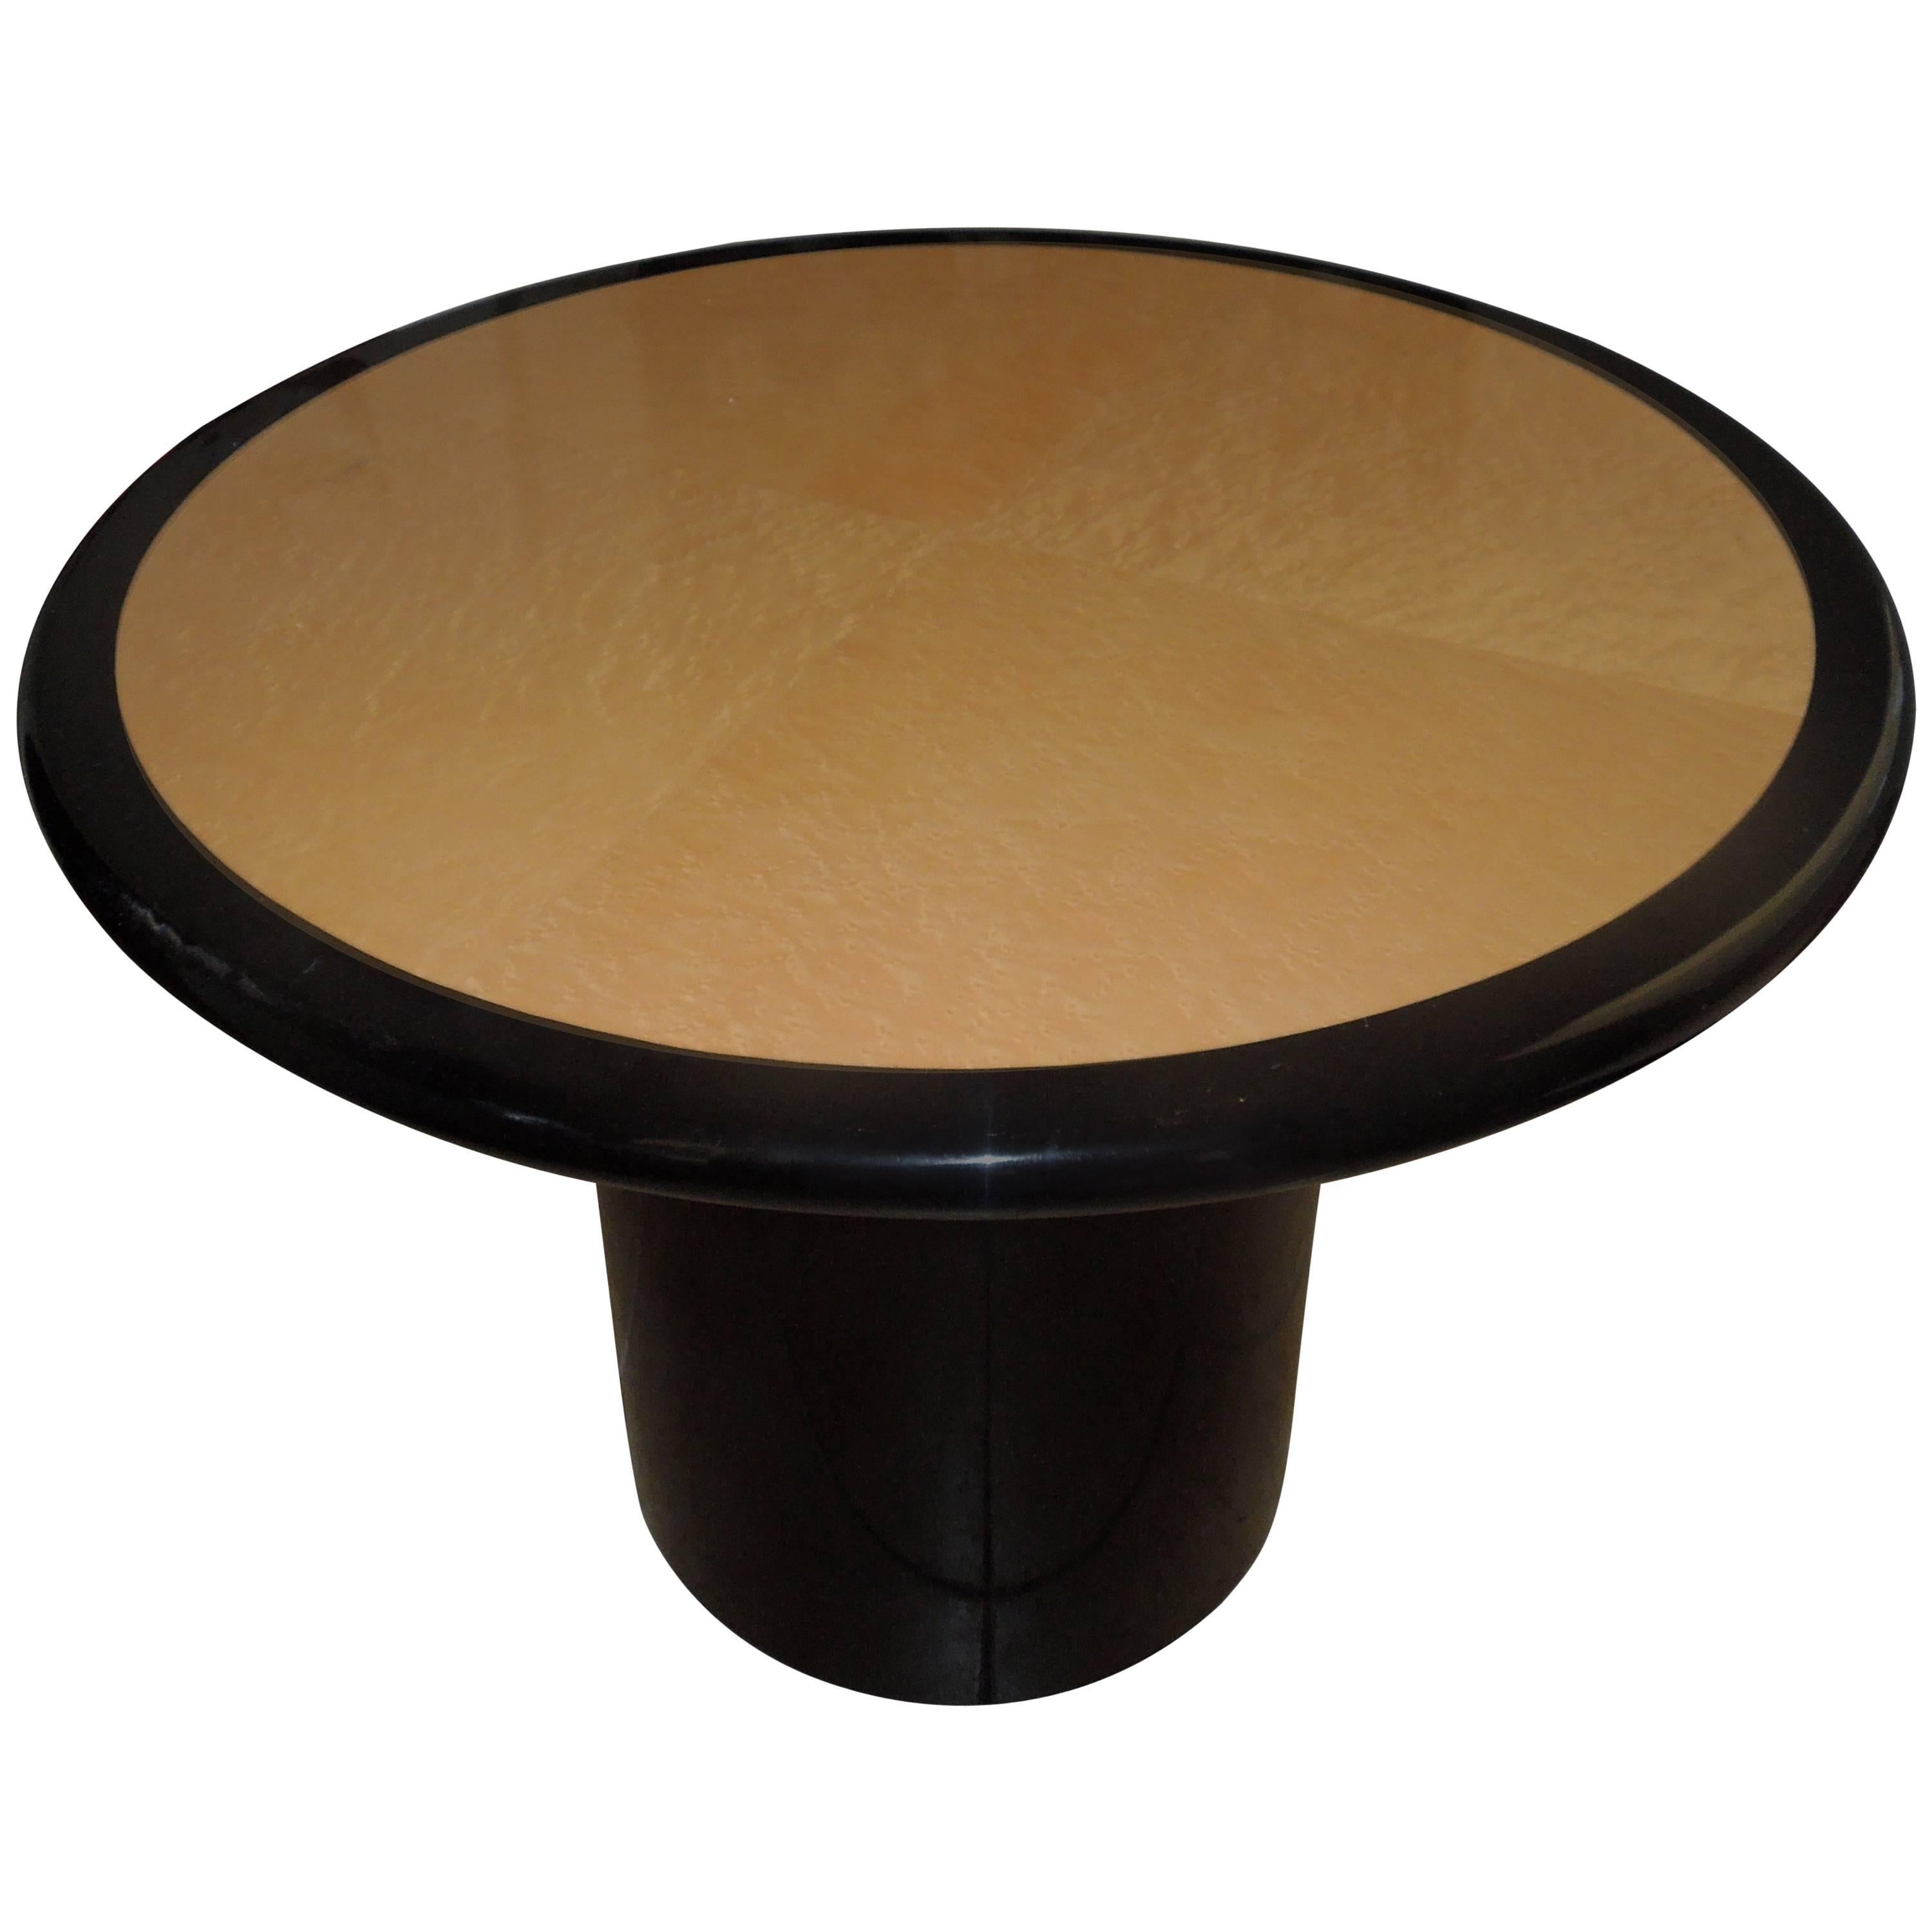 Custom-Made 1980s Chic Bird's-Eye Maple and Black Lacquer Game Table